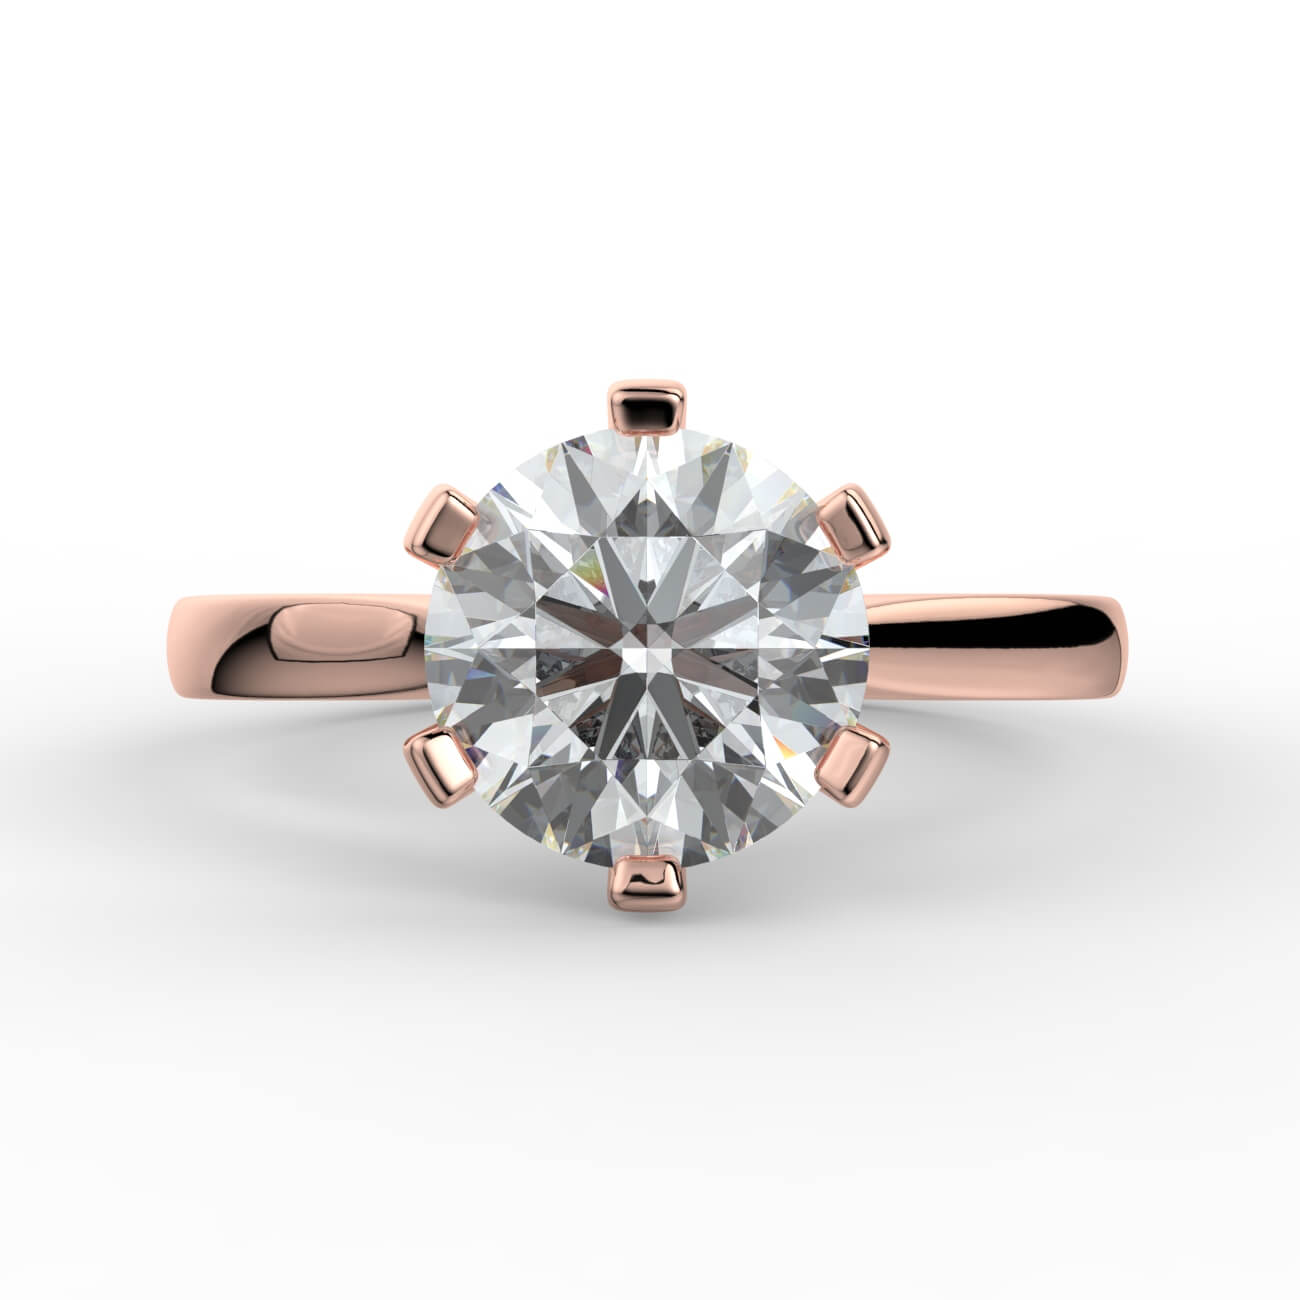 Round brilliant cut diamond cathedral engagement ring in rose gold – Australian Diamond Network